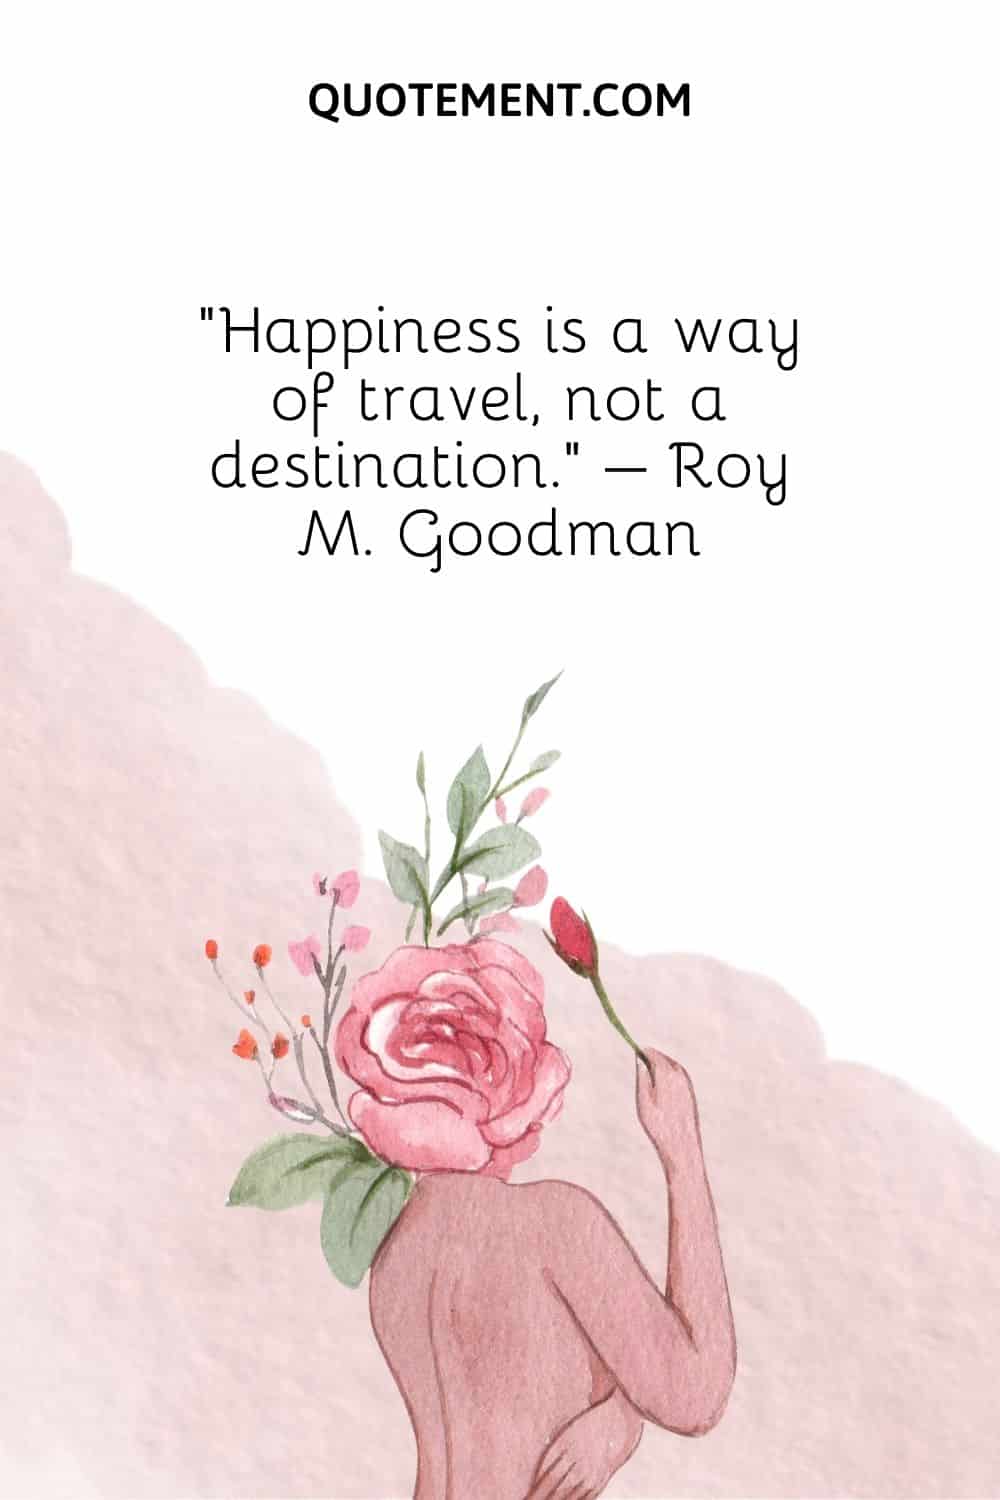 Happiness is a way of travel, not a destination. – Roy M. Goodman